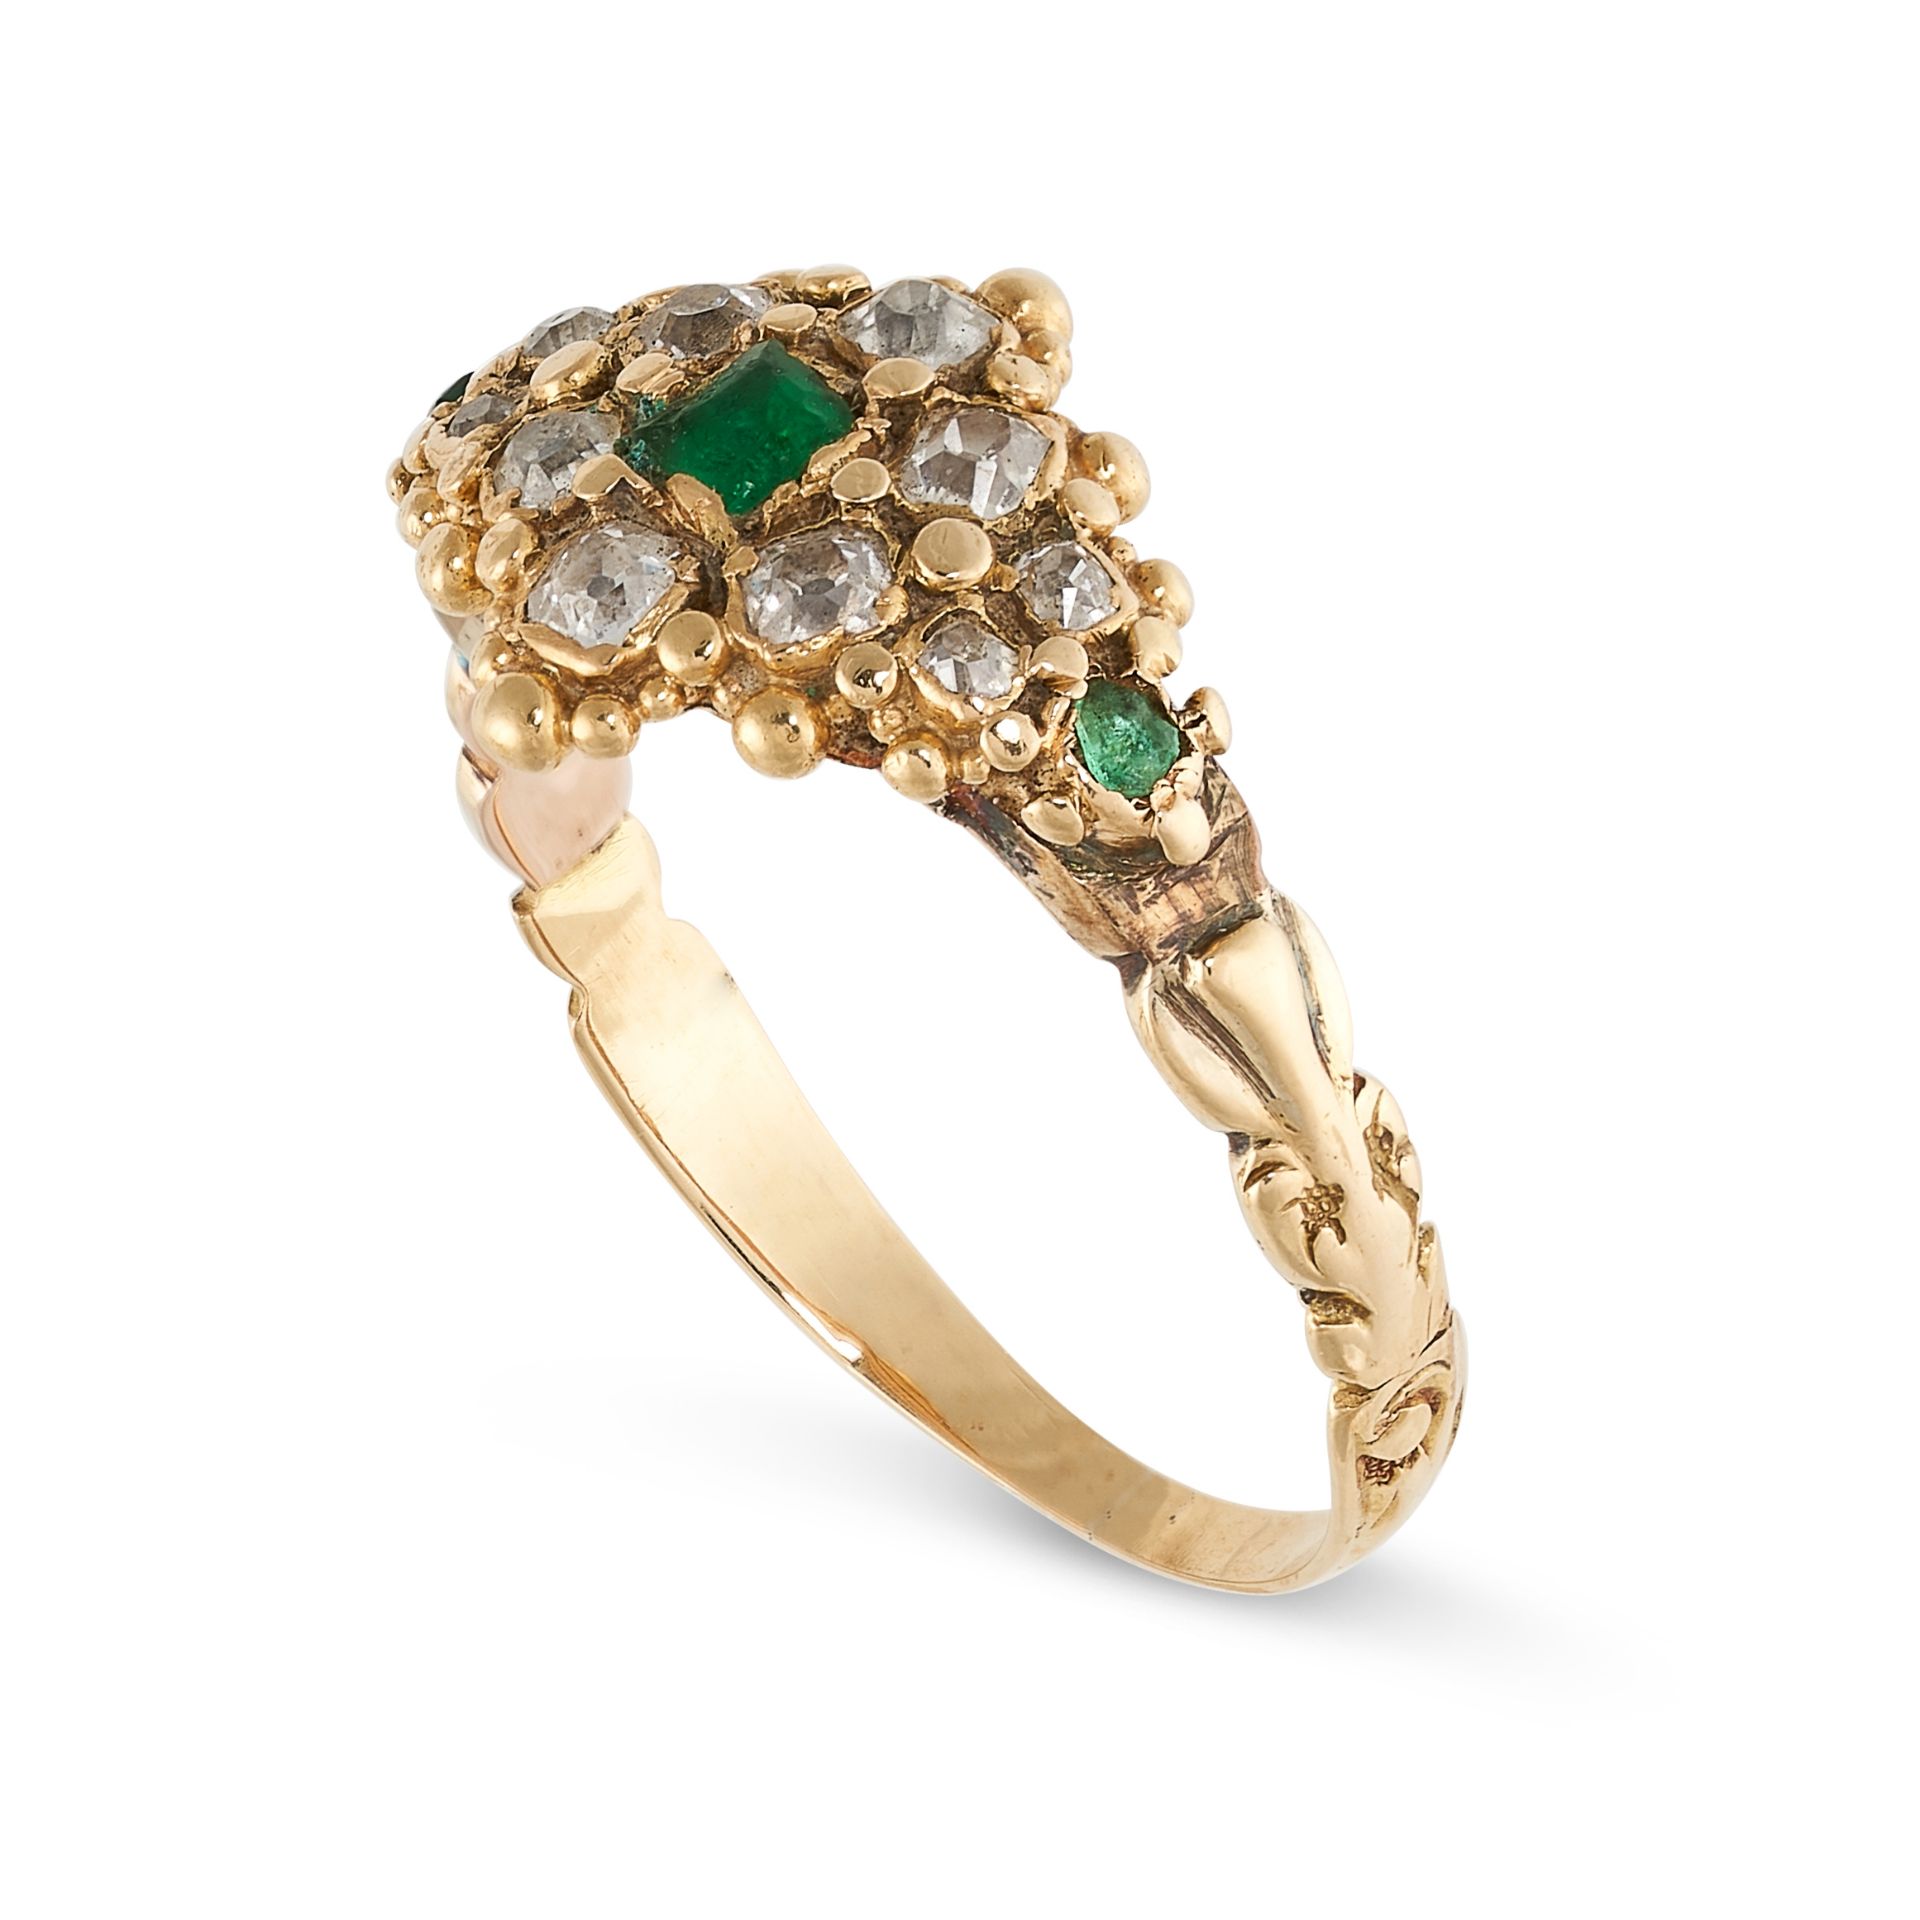 NO RESERVE - AN ANTIQUE EMERALD AND DIAMOND RING, EARLY 19TH CENTURY in yellow gold, set with a trio - Image 2 of 2